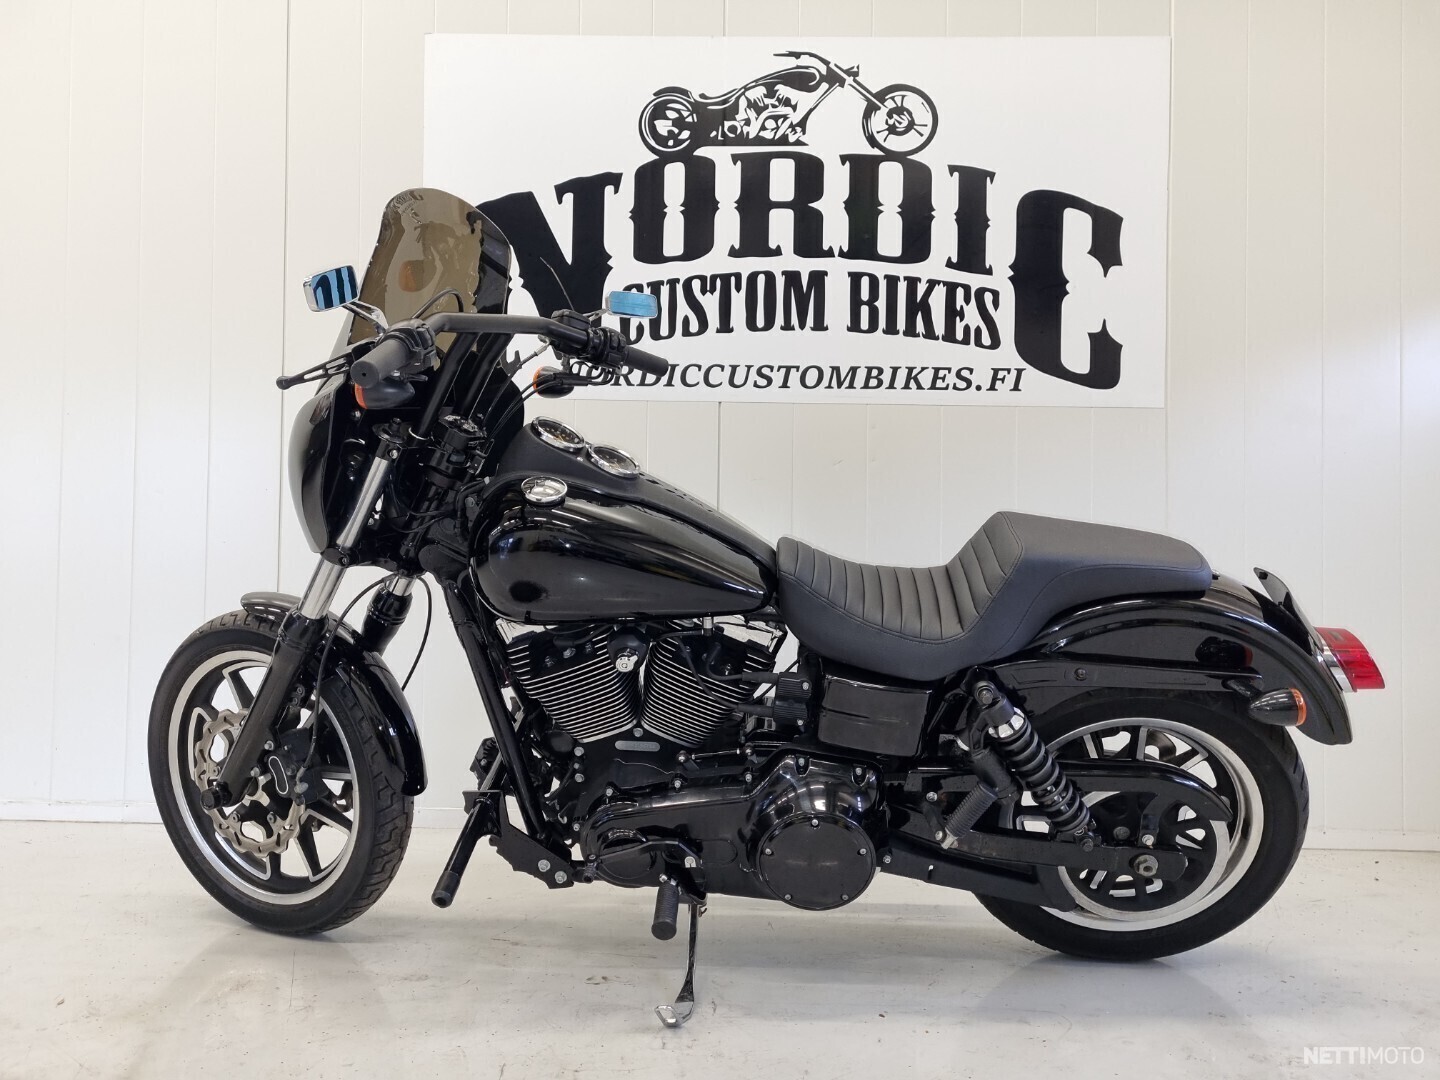 Harley Davidson Dyna Fxdl Dyna Low Rider 1 700 Cm 2015 Tuusula Motorcycle Nettimoto